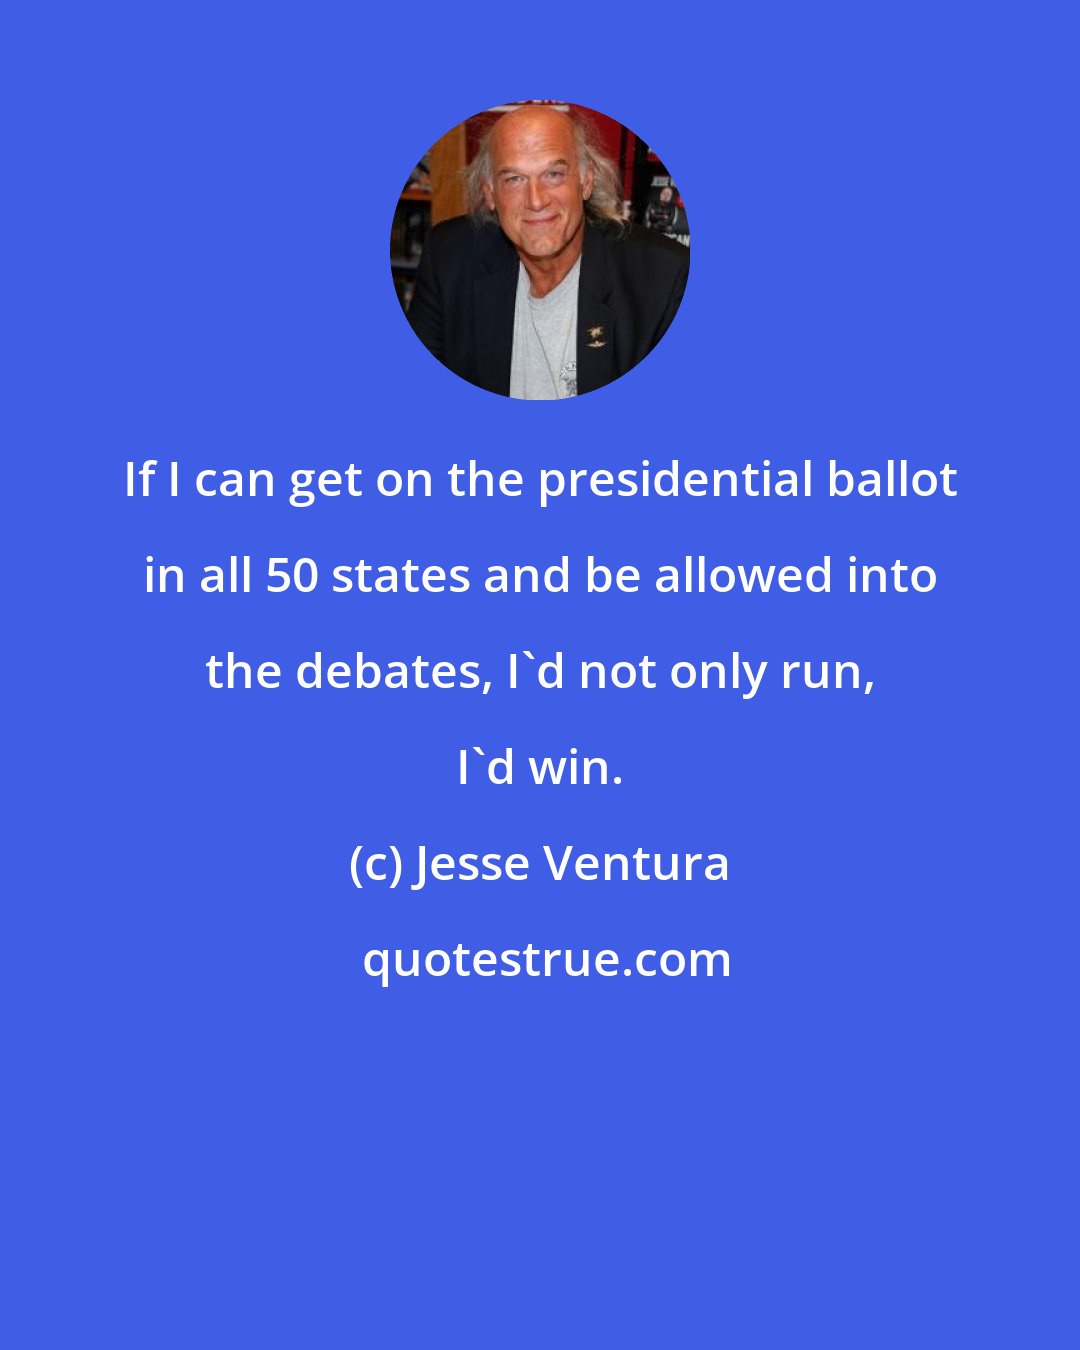 Jesse Ventura: If I can get on the presidential ballot in all 50 states and be allowed into the debates, I'd not only run, I'd win.